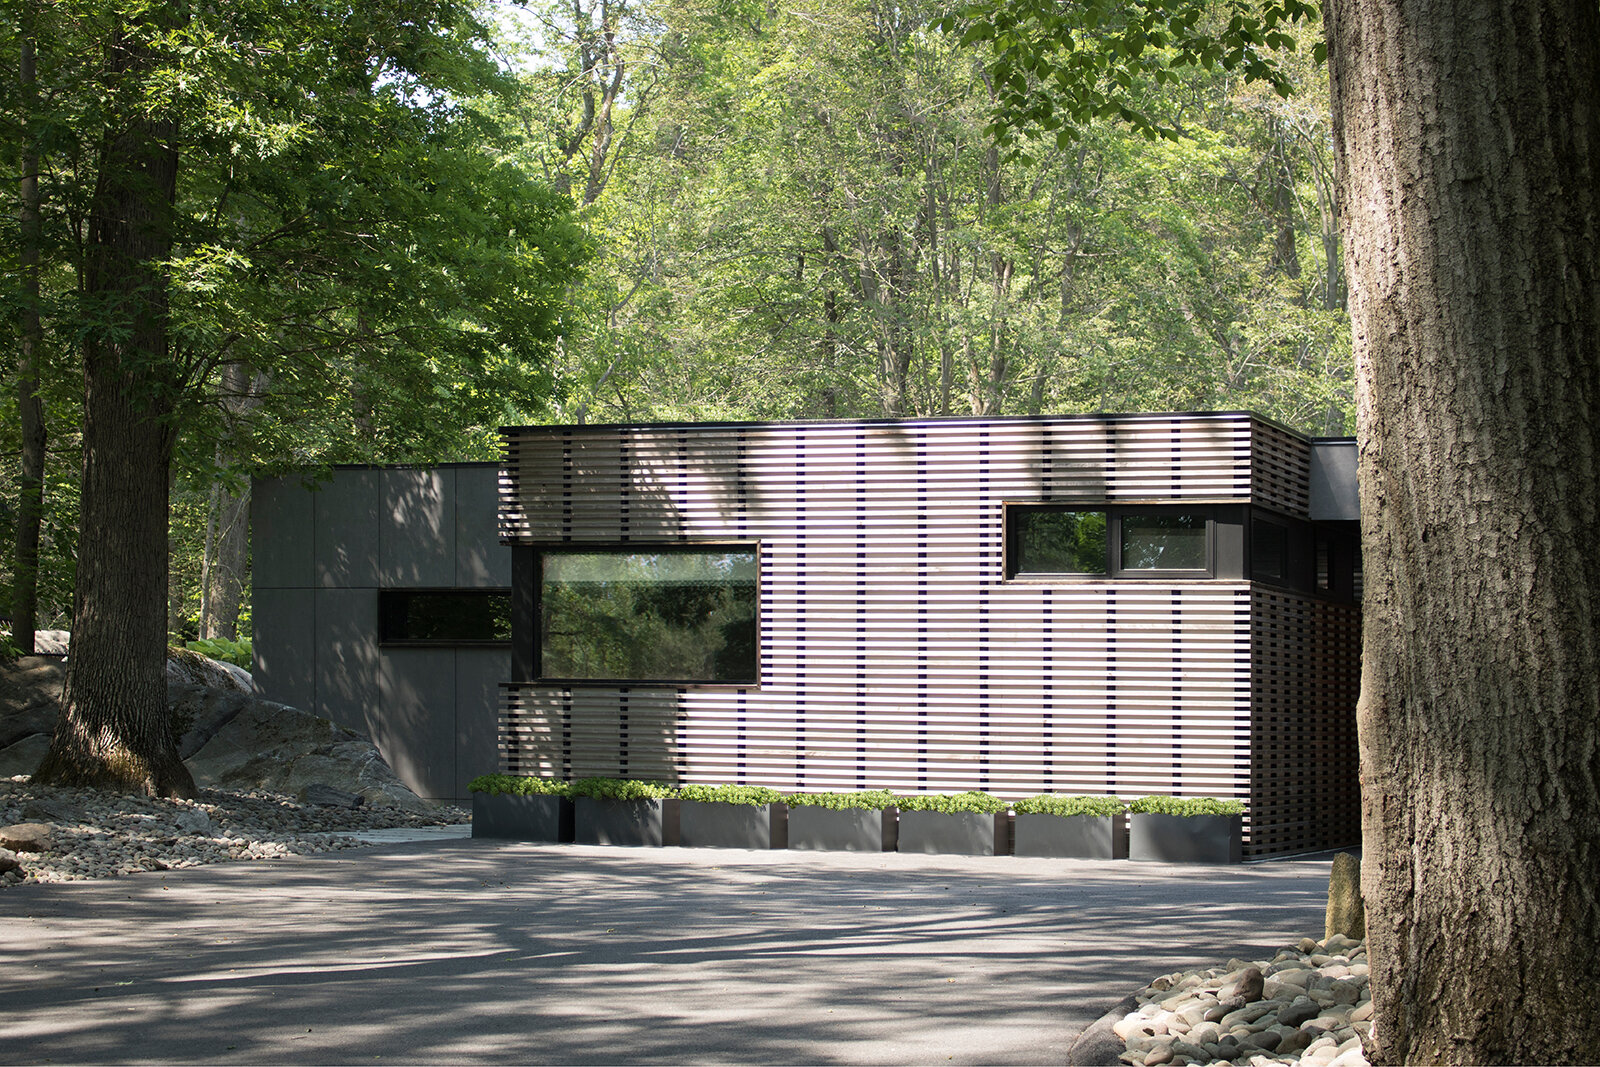 05-res4-re4a-resolution-4-architecture-modern-modular-prefab-fenimore road addition-exterior-autocourt.jpg